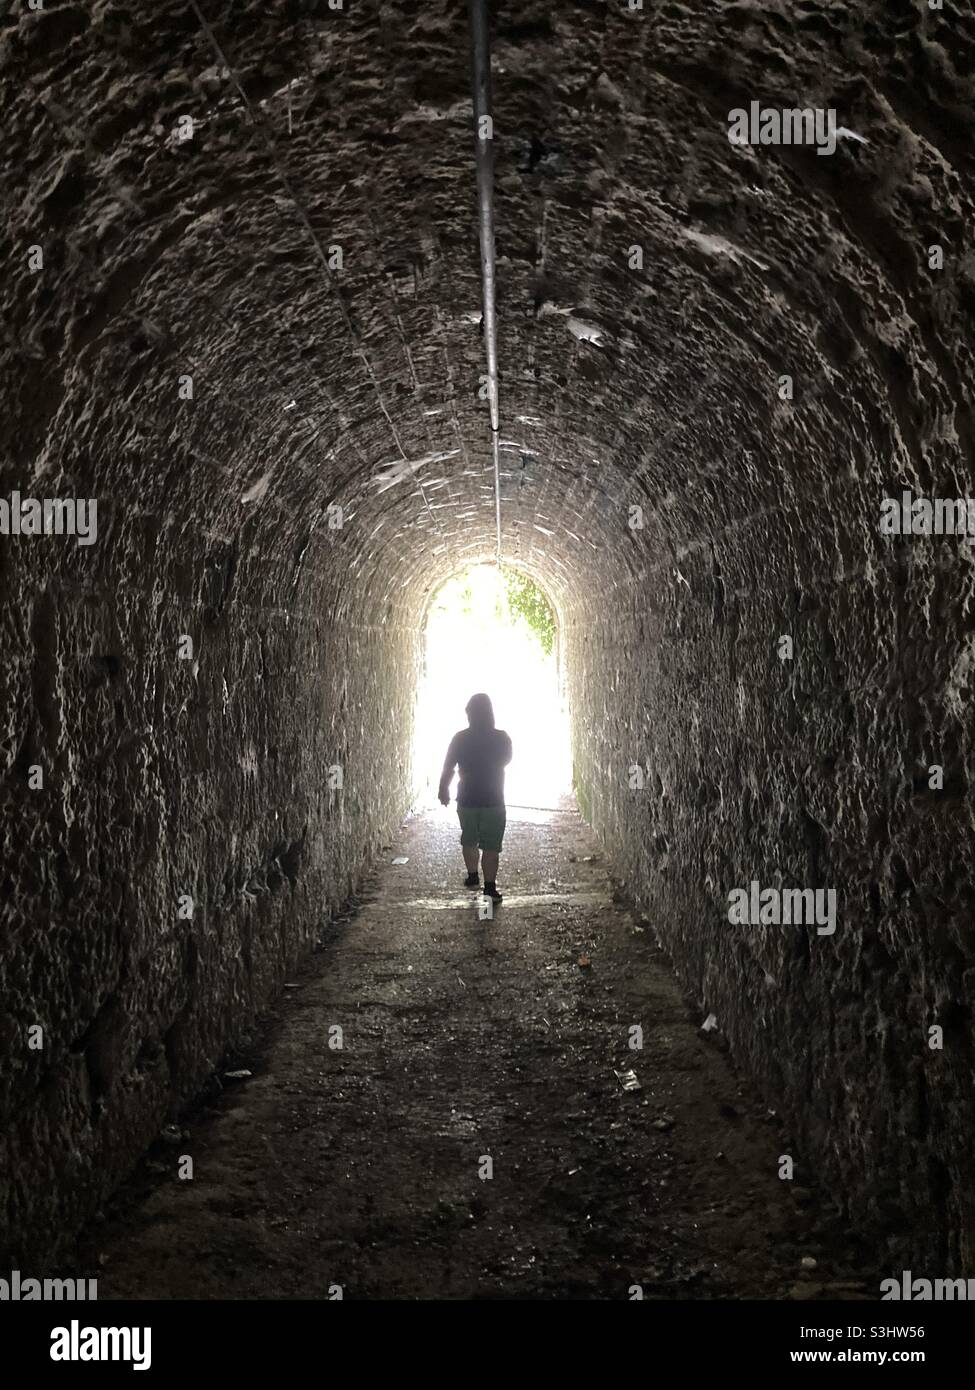 Anonymous silhouette of a man walking through a dark underpass symbolizing light at the end of a tunnel Stock Photo